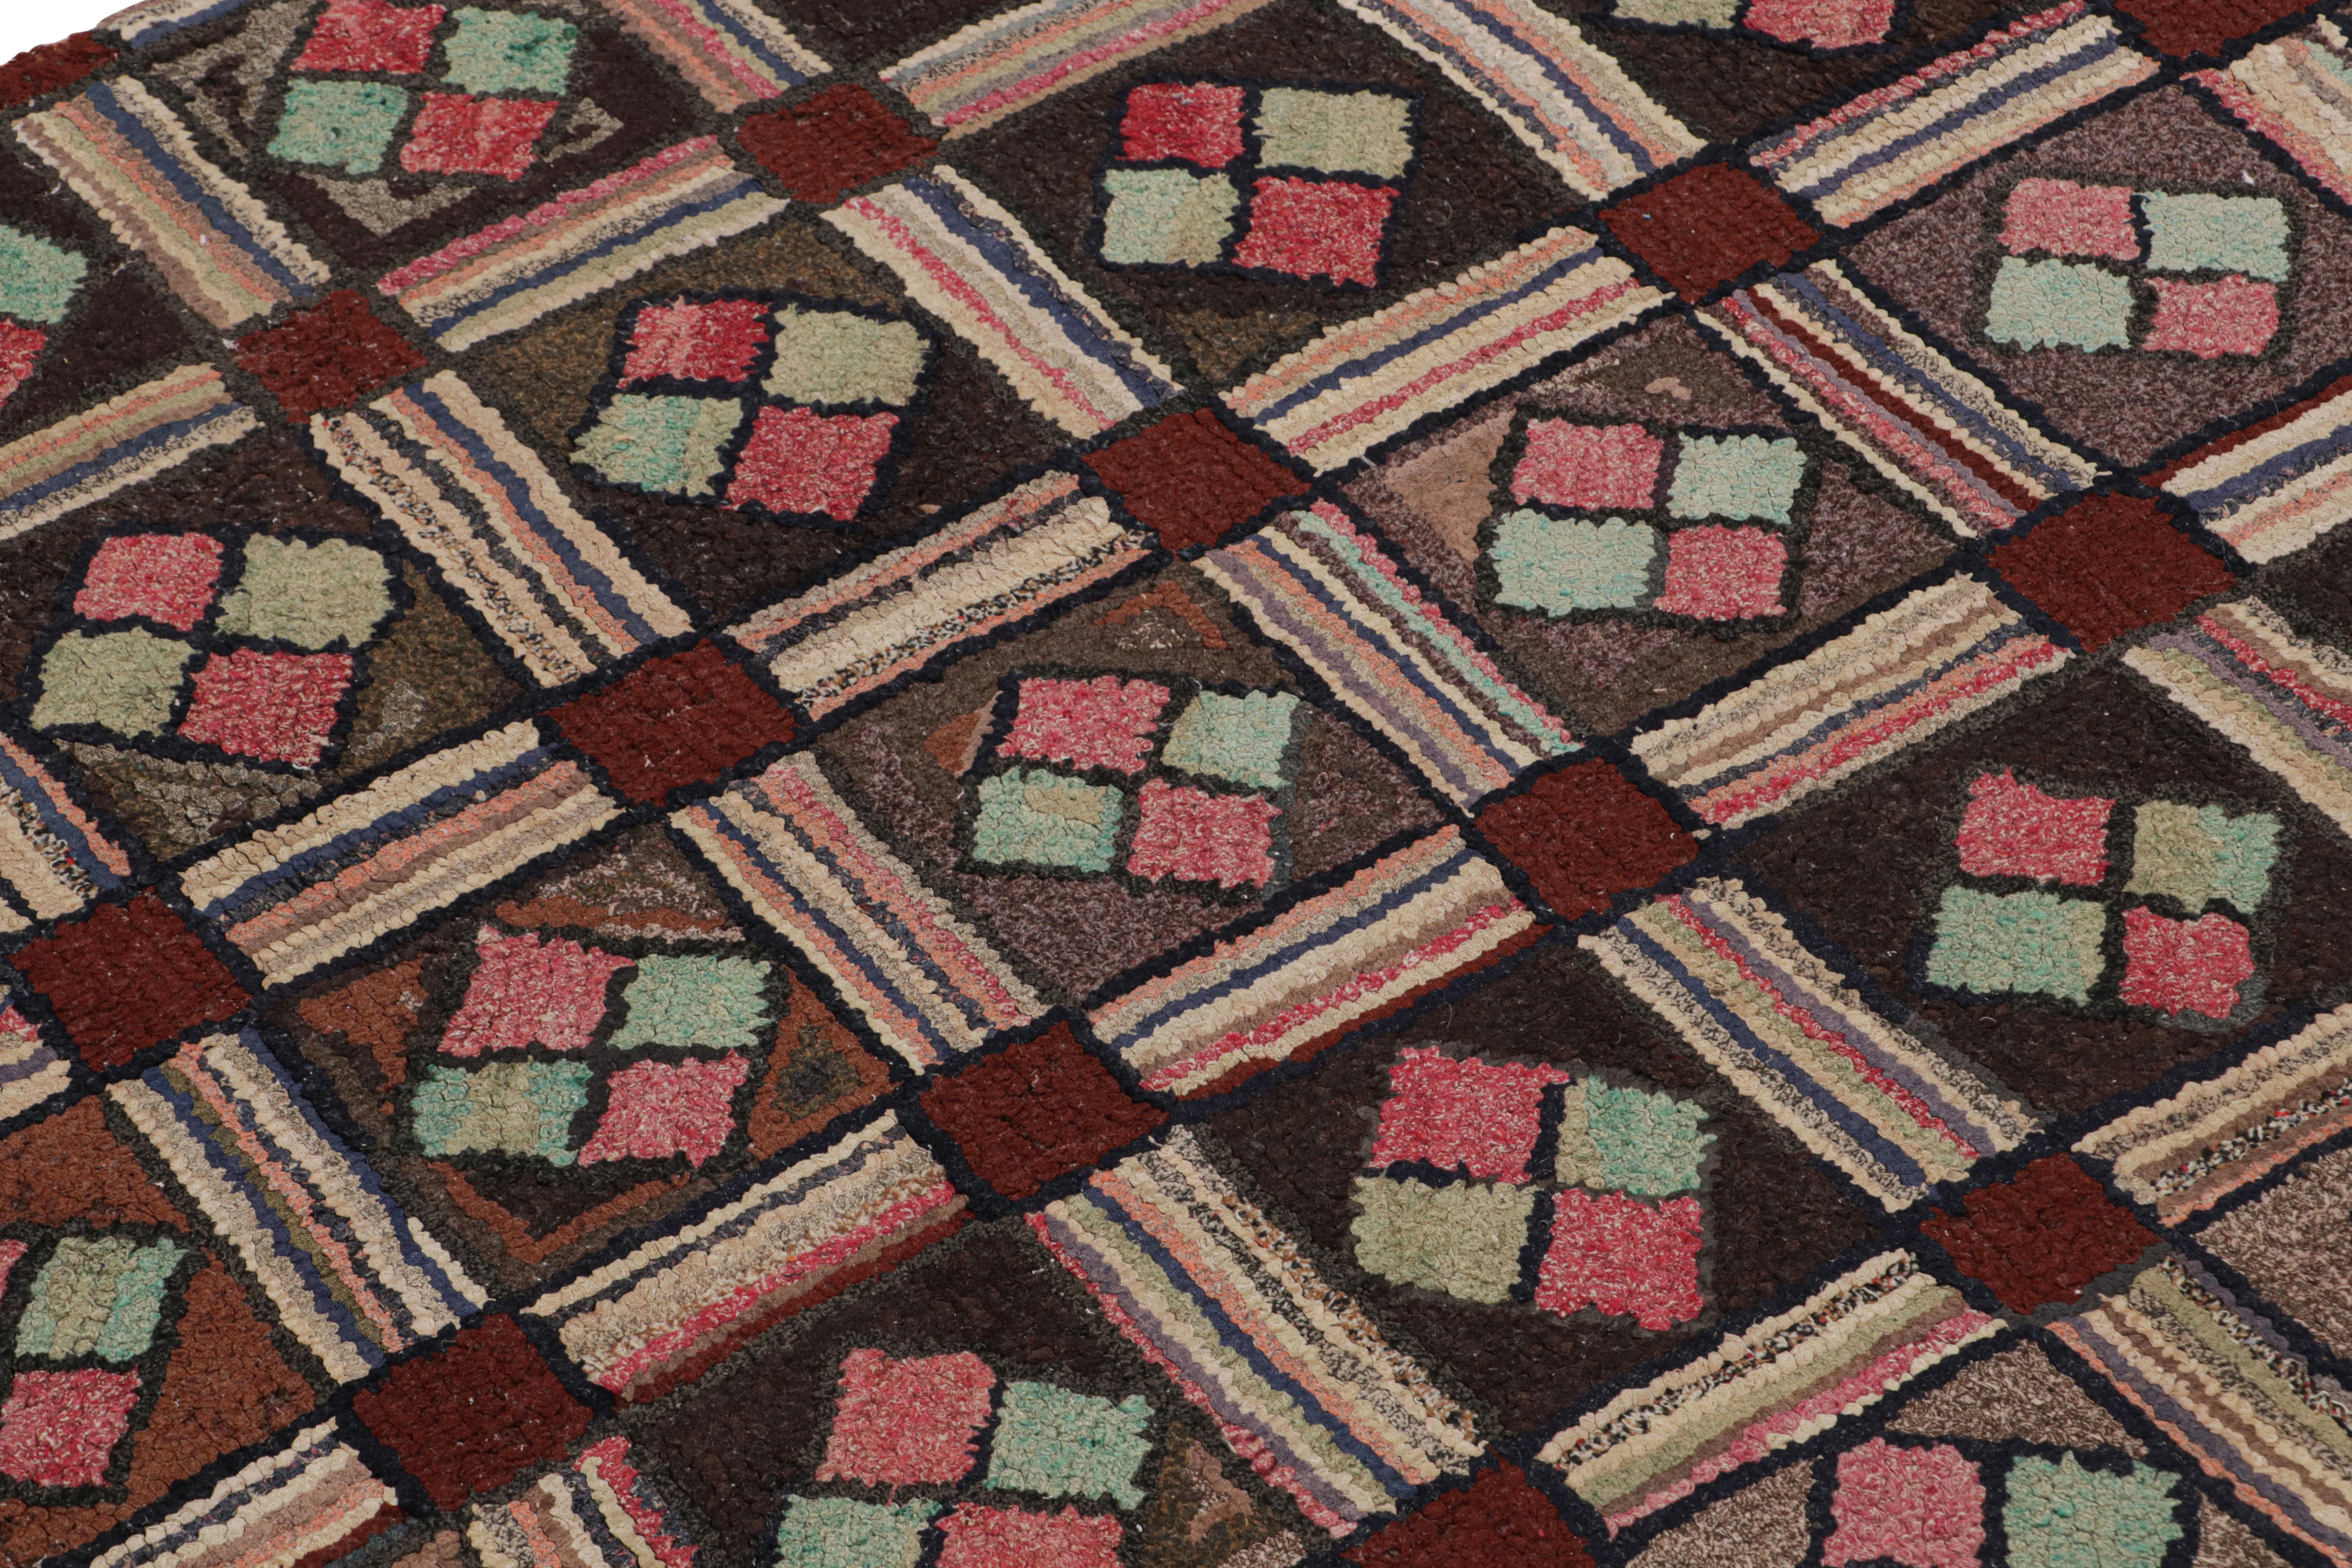 Early 20th Century Antique Hooked Rug with Brown, Red and Blue Geometric Patterns, from Rug & Kilim For Sale